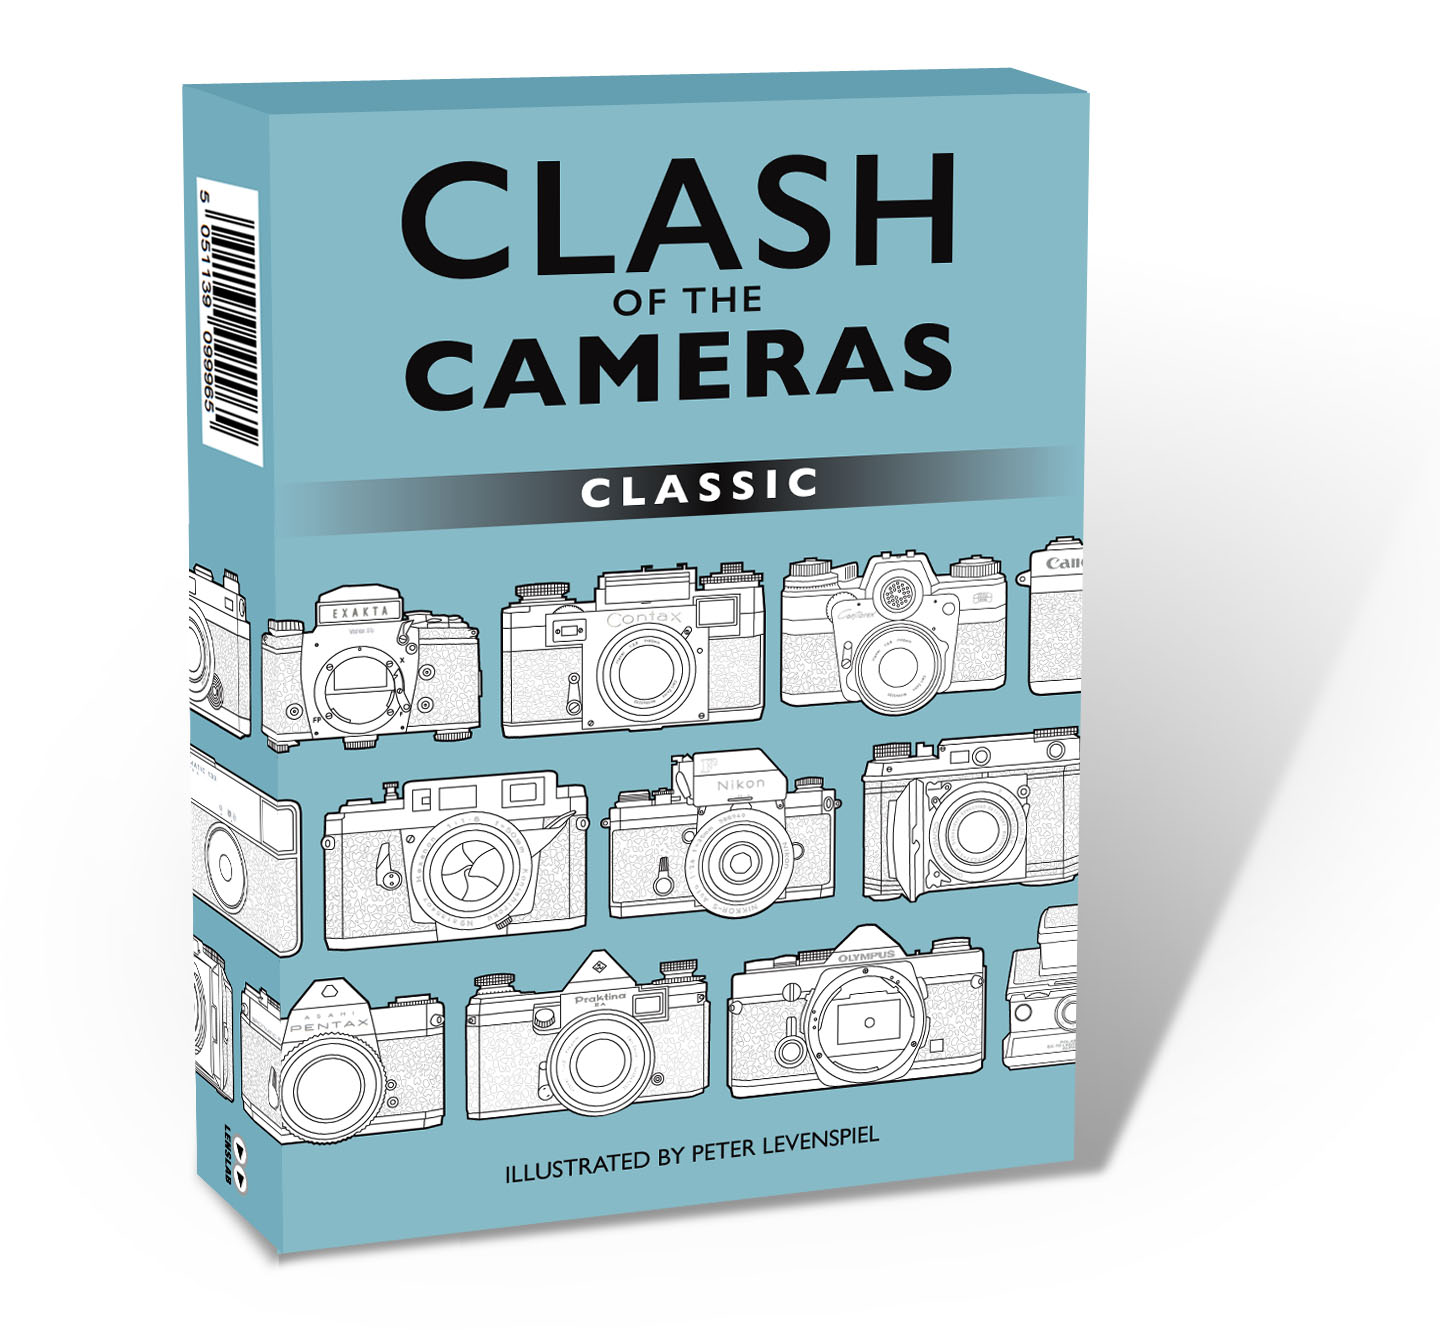 Clash of the Cameras - Classic: Top trumps card game